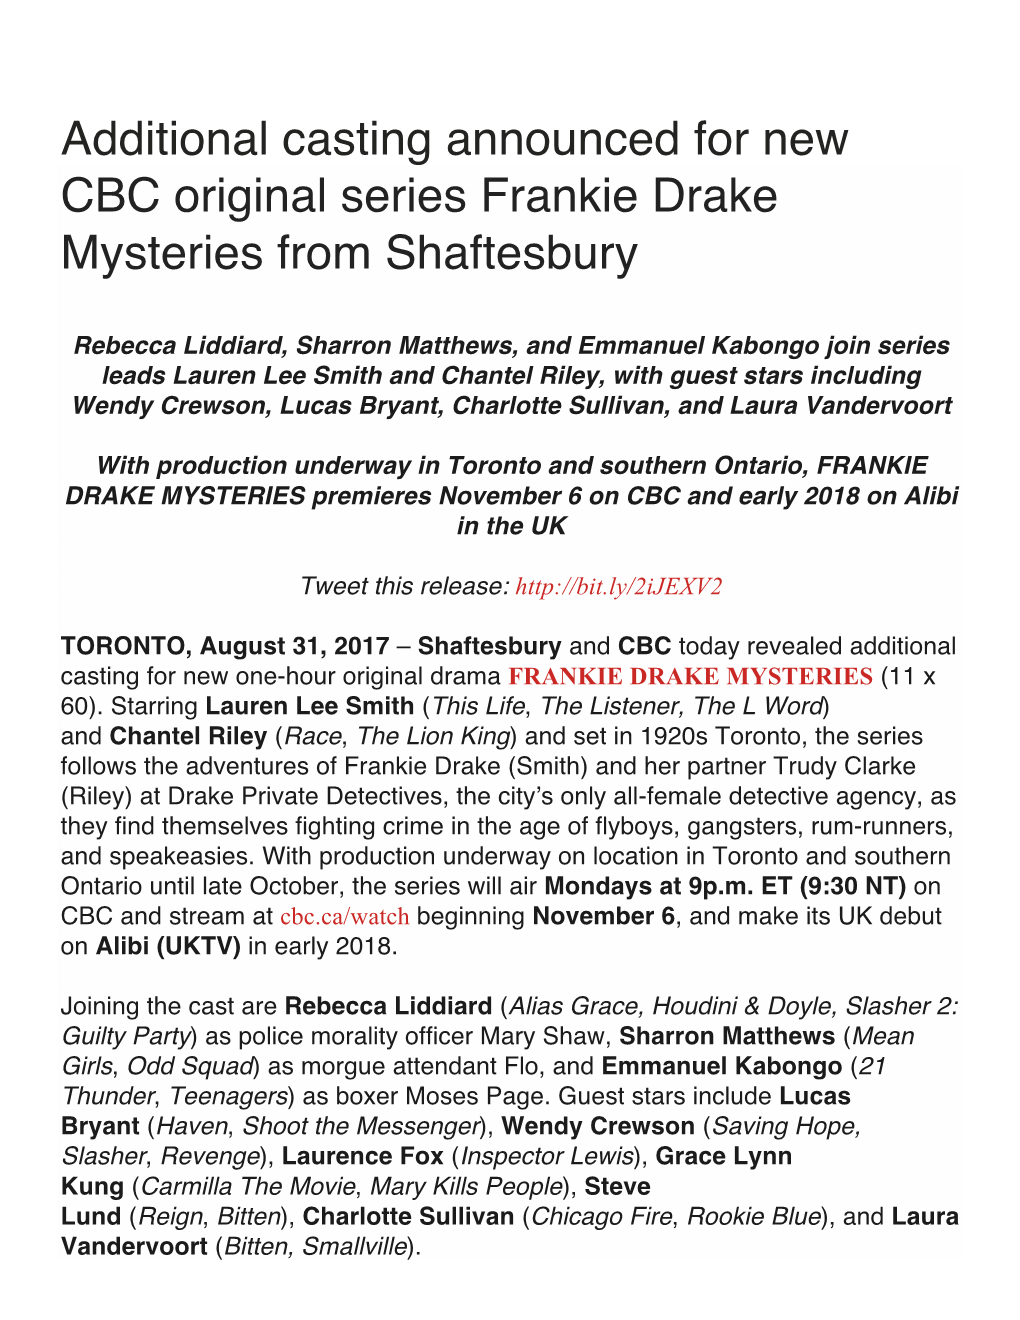 Additional Casting Announced for New CBC Original Series Frankie Drake Mysteries from Shaftesbury